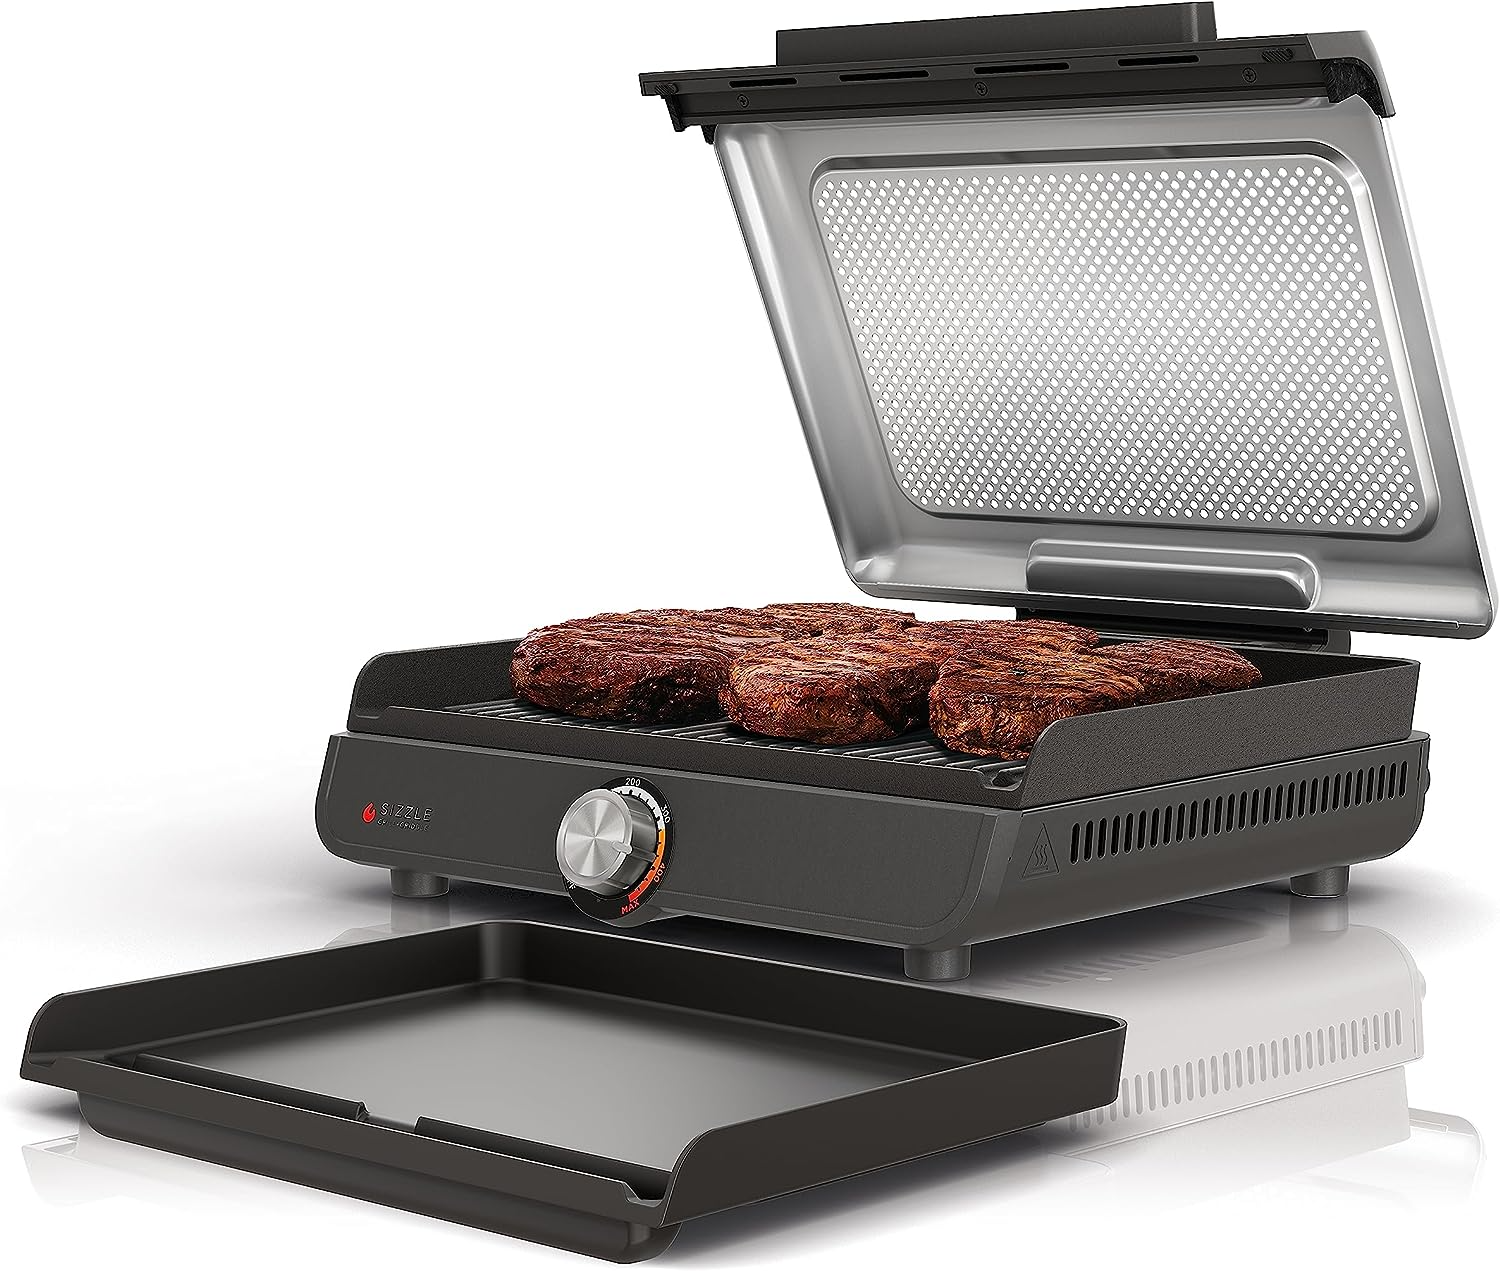 Ninja GR101 Sizzle Smokeless Indoor Grill & Griddle, 14'' Interchangeable Nonstick Plates, Dishwasher-Safe Removable Mesh Lid, 500F Max Heat, Even Edge-to-Edge Cooking, Grey/Silver - Barbecue Whizz...Watch My Smoke!